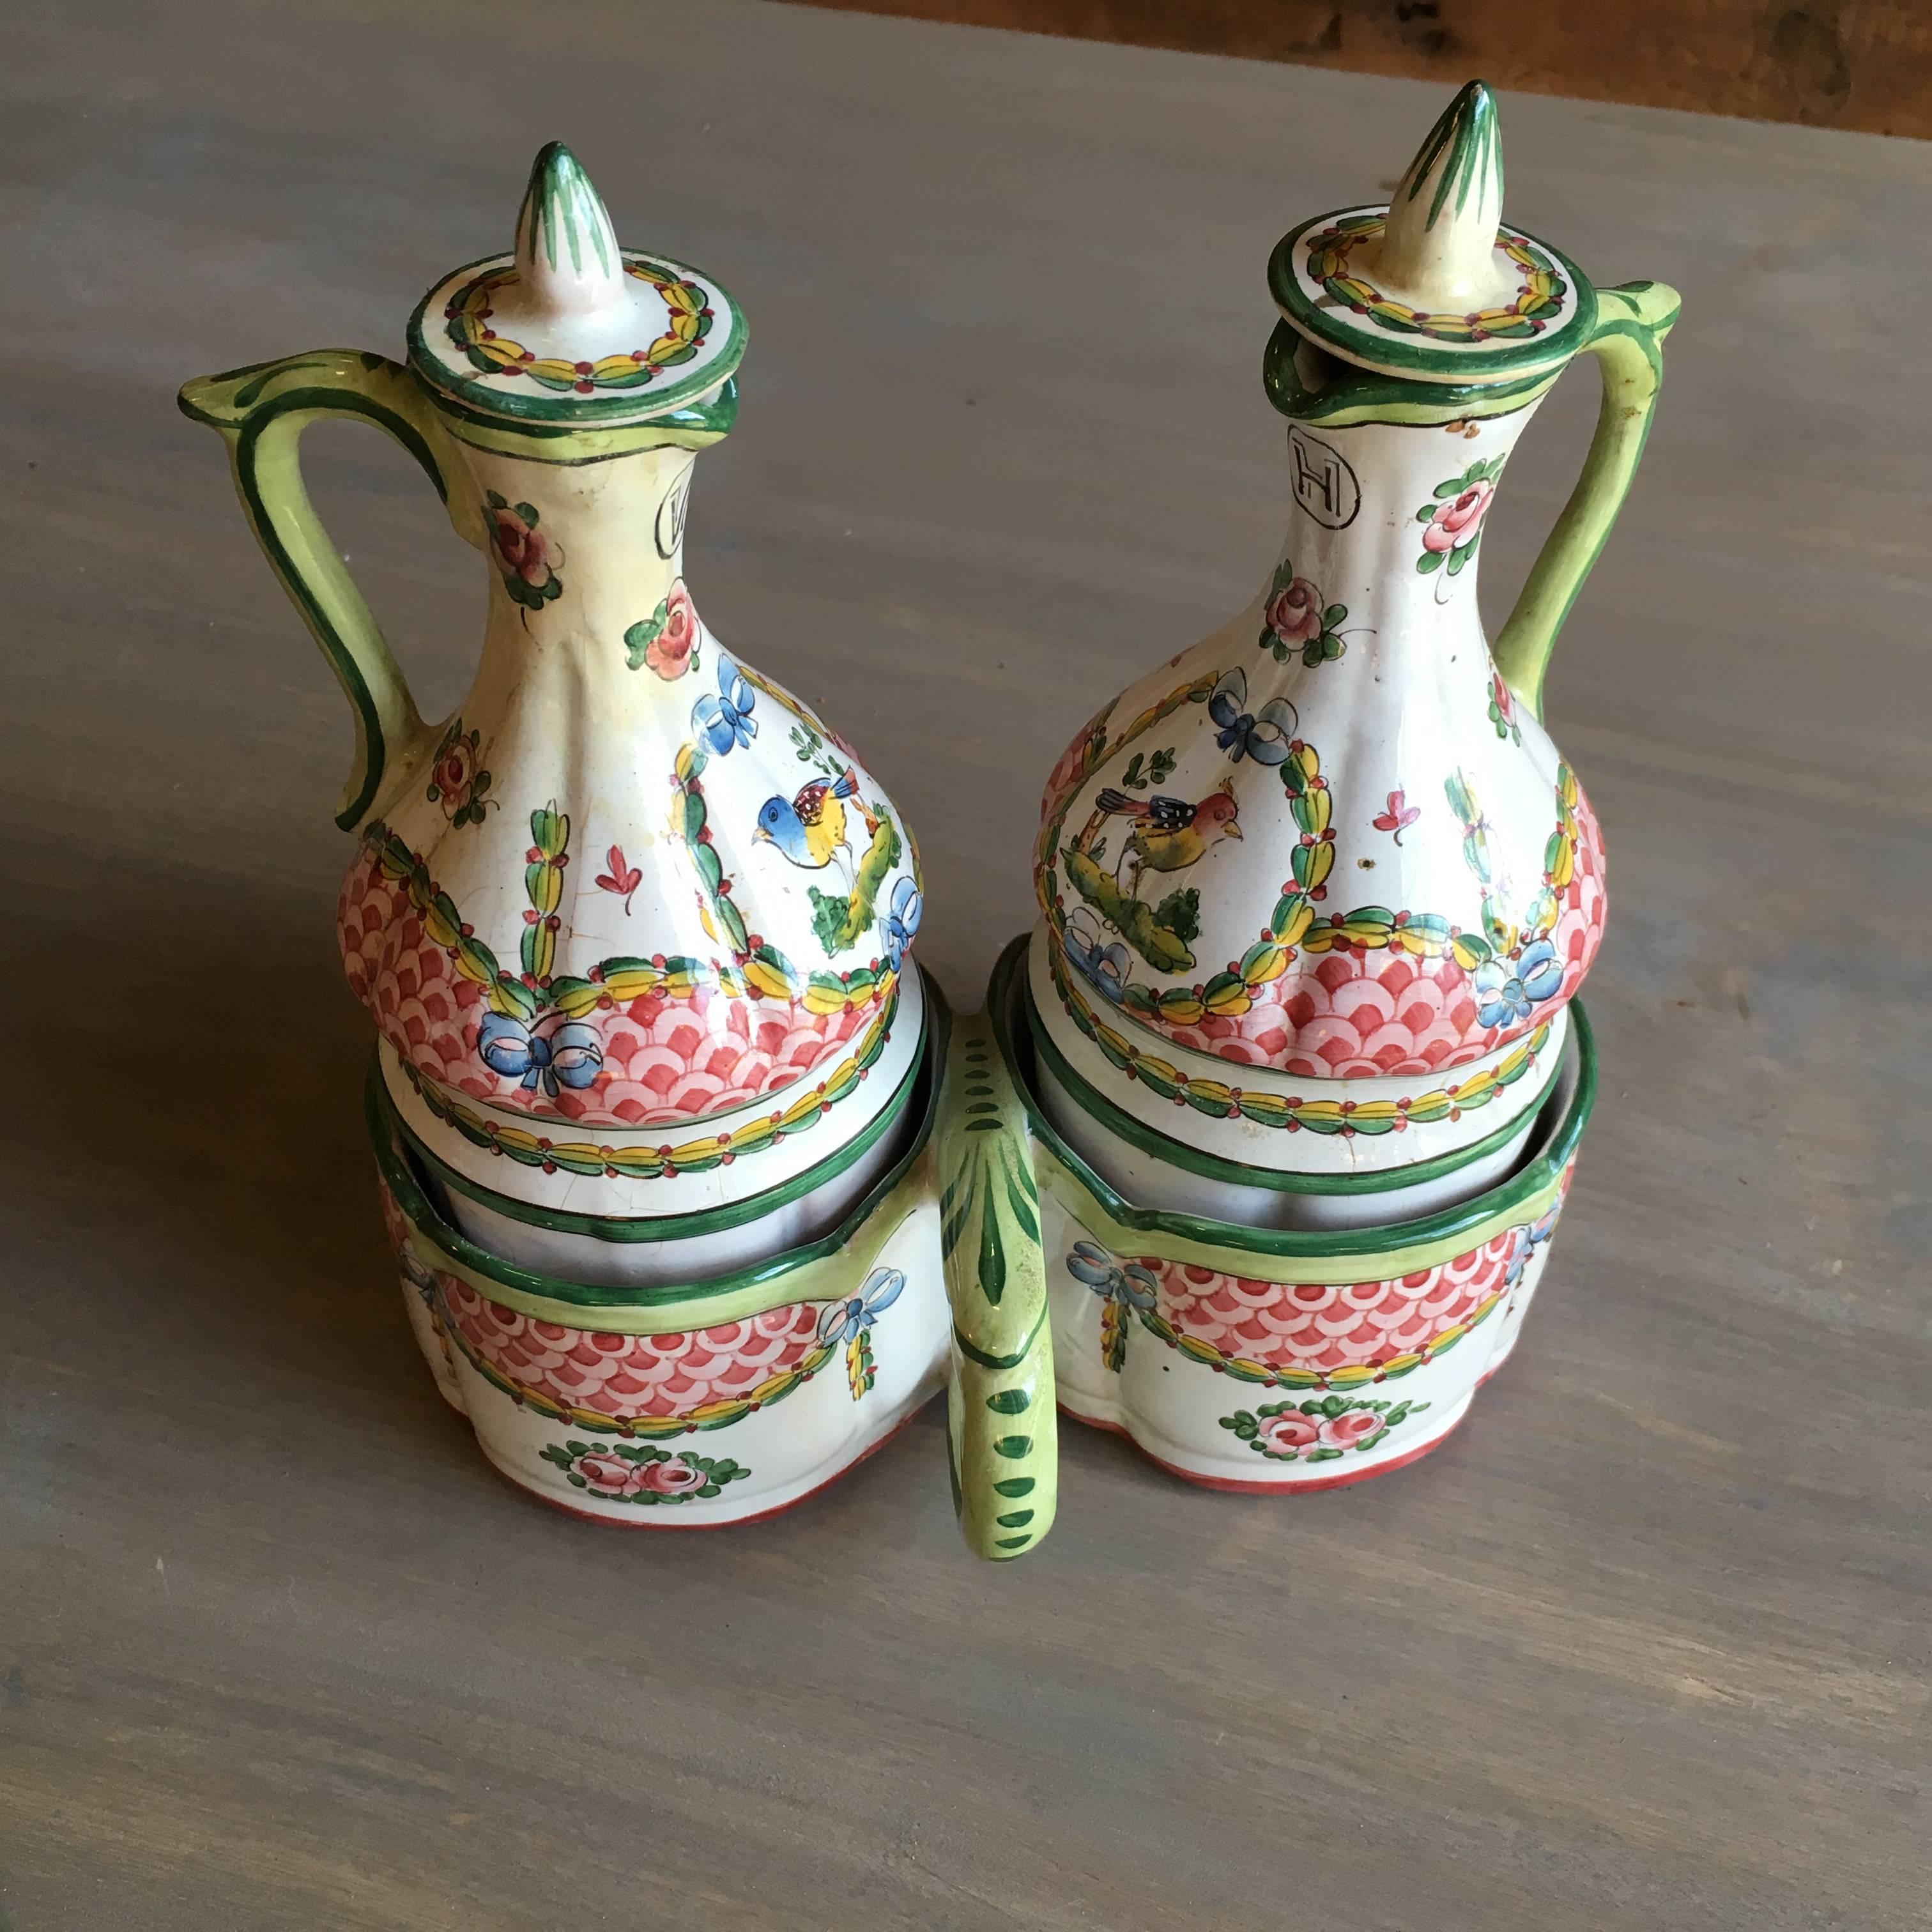 A charming 18th century French cruet set in faience, with original holder and stoppers, nicely decorated with birds, flowers and garlands with the H for Huile (oil) and the V for Vinaigre (vinegar). Signed on bottom 